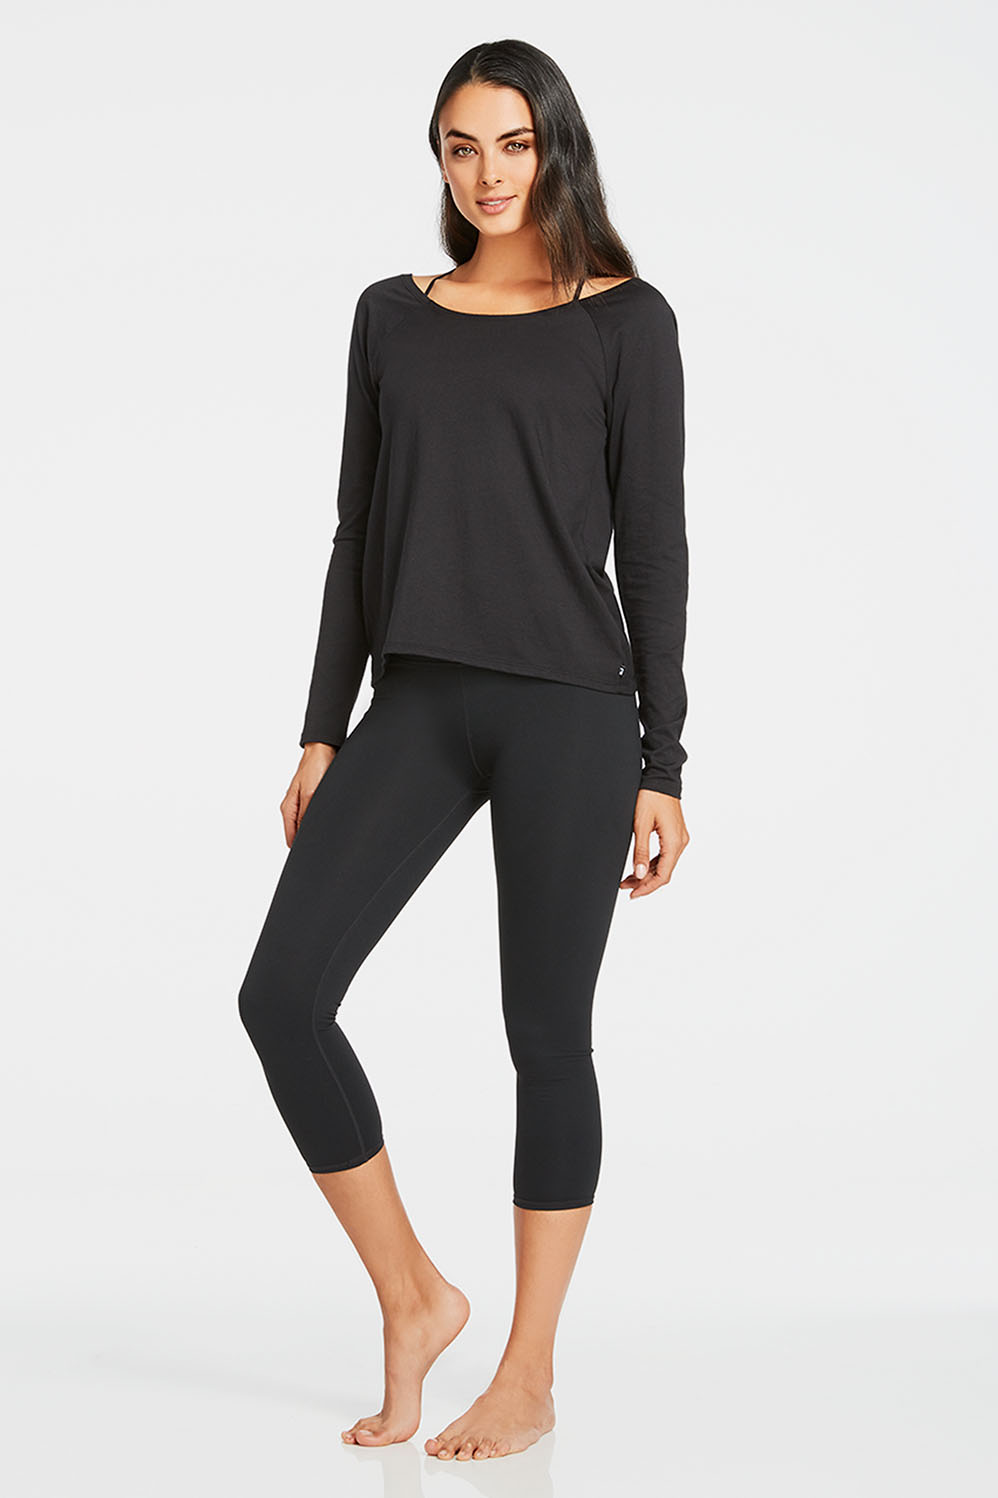 Aloe Outfit - Get great athletic wear at Fabletics